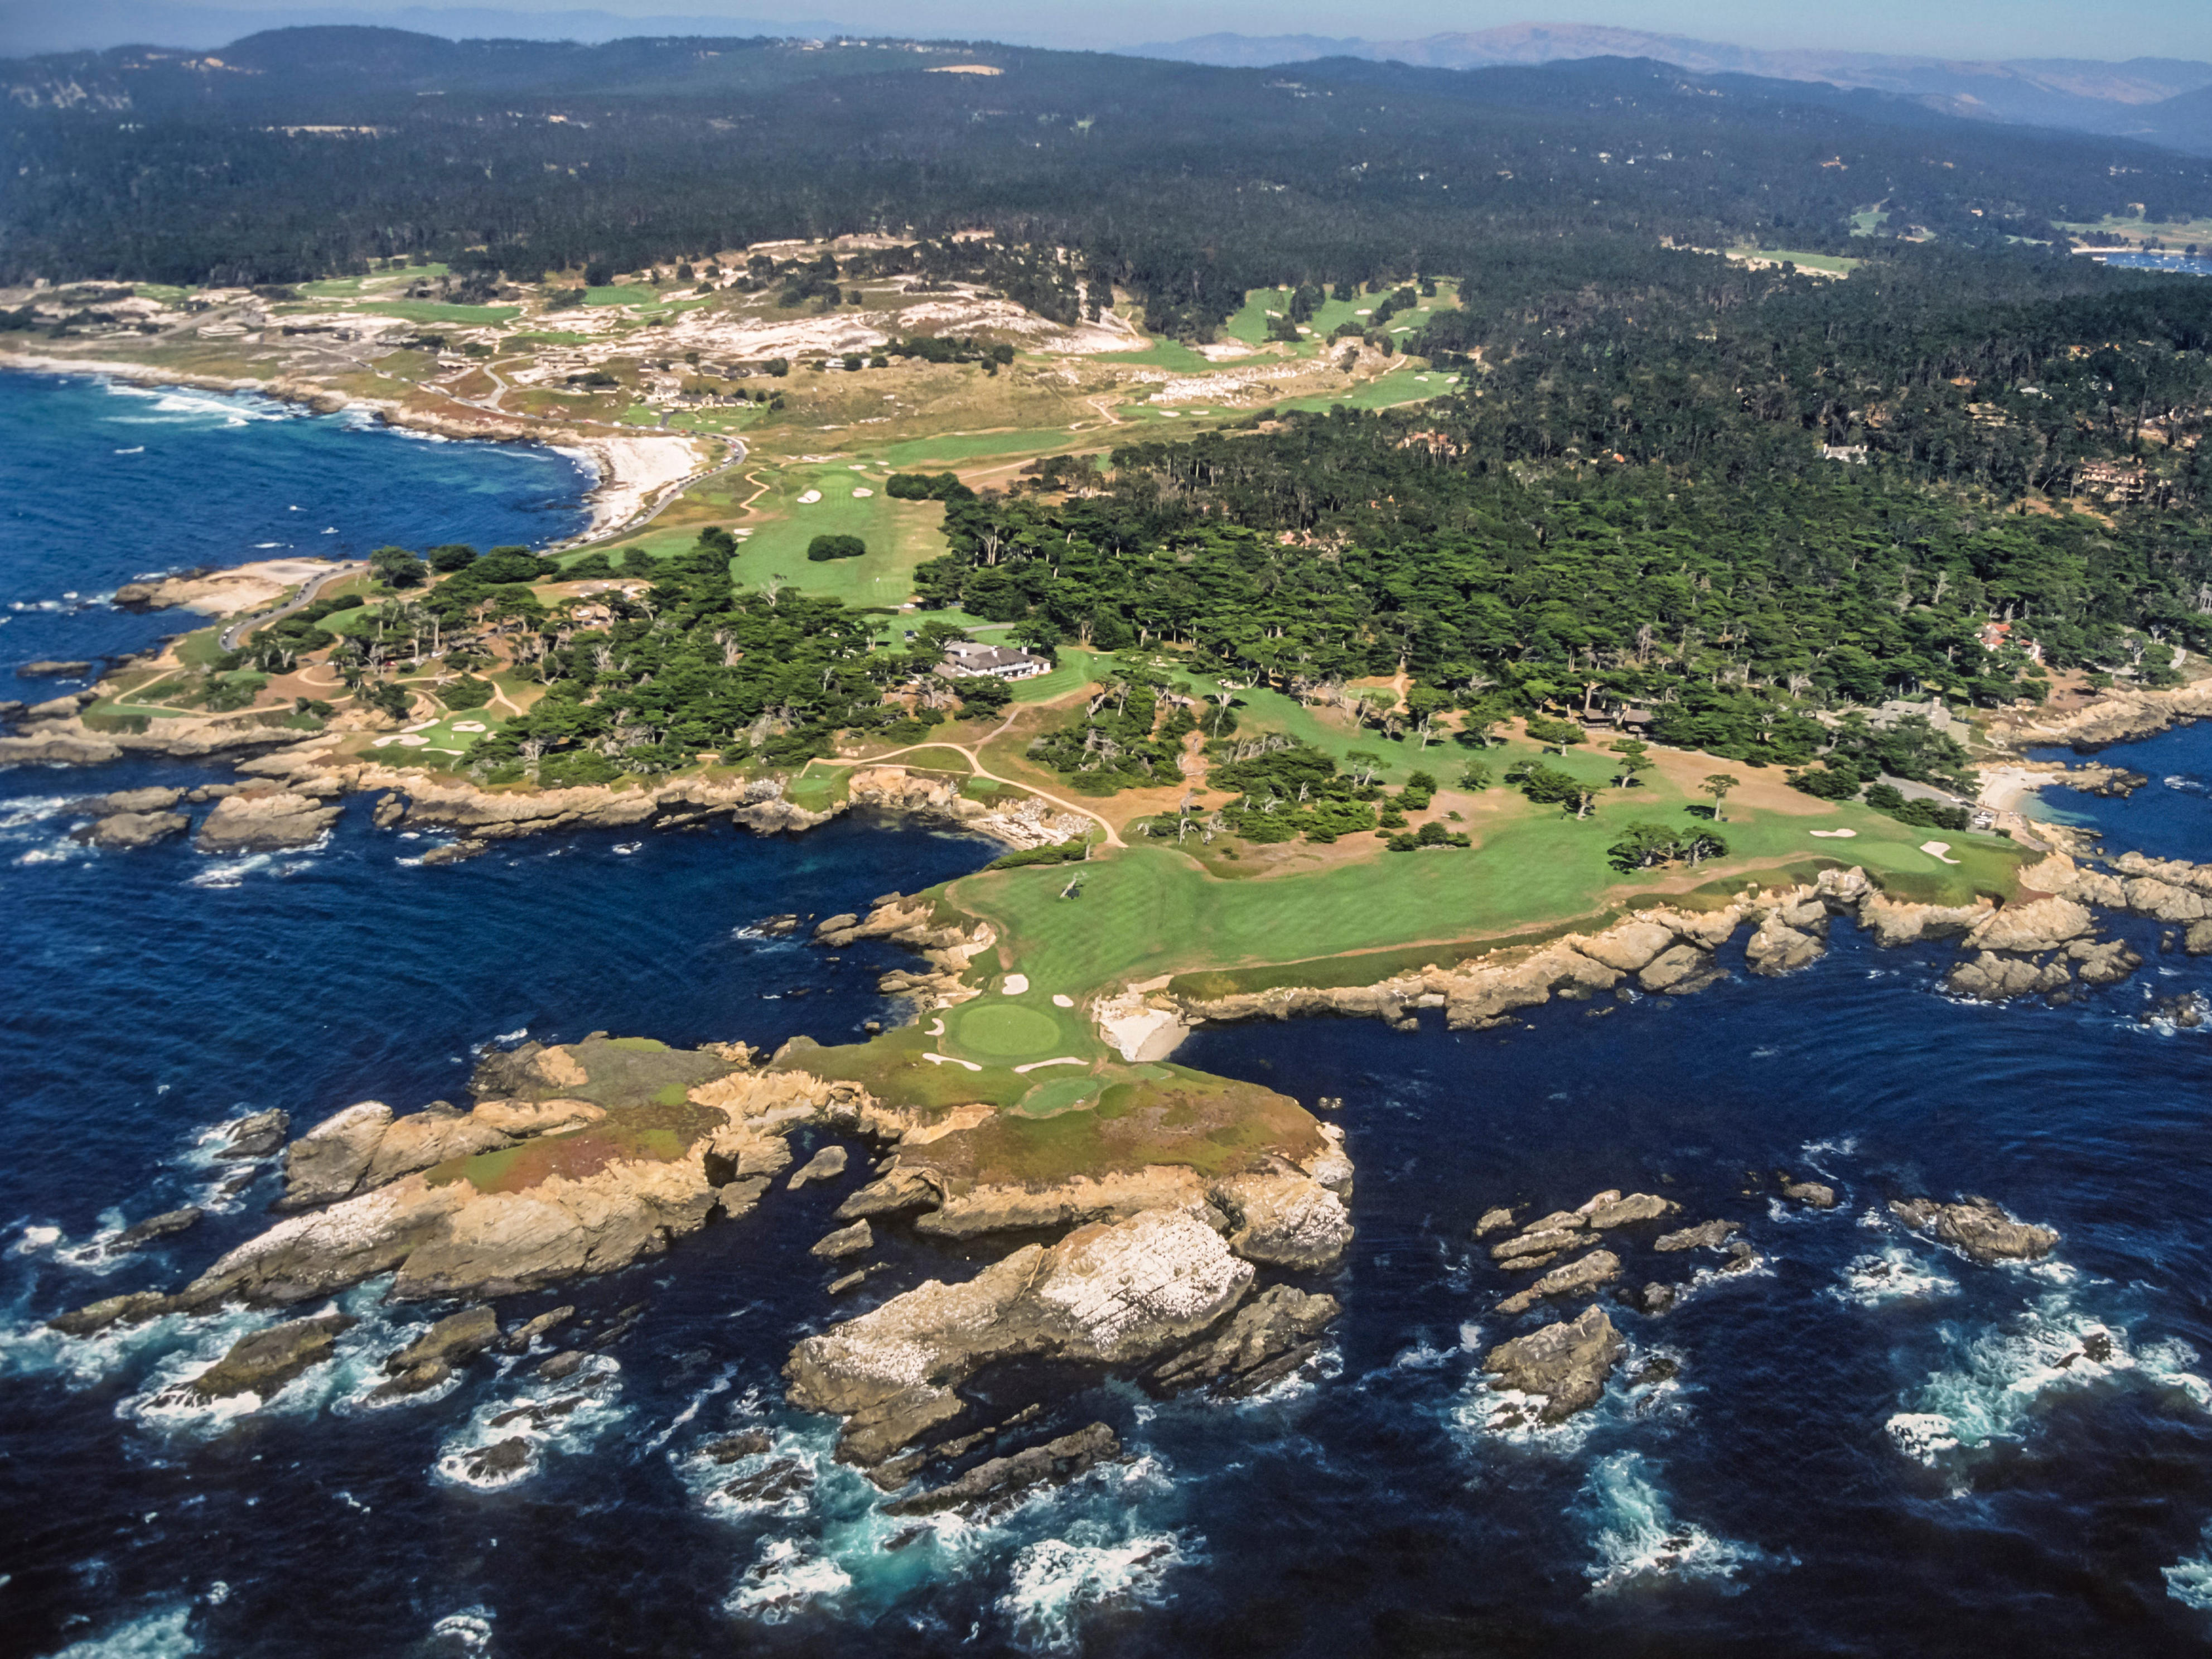 <p>In 2019, Cypress Point was named one of Golf.com's most exclusive golf clubs in the world. To quote entertainer and comedian Bob Hope, "One year, they had a big membership drive at Cypress. They drove out 40 members."</p><p>Business Insider reported that Cypress has only about 250 members, with <a href="https://golfaddict.com/en/cypress-point-club-paradise-has-only-250-seats/">Golf Addict</a> noting that the clientele is primarily "prominent politicians, businessmen, and movie stars," who split the course's fees equally, no matter how much they actually golf.</p>